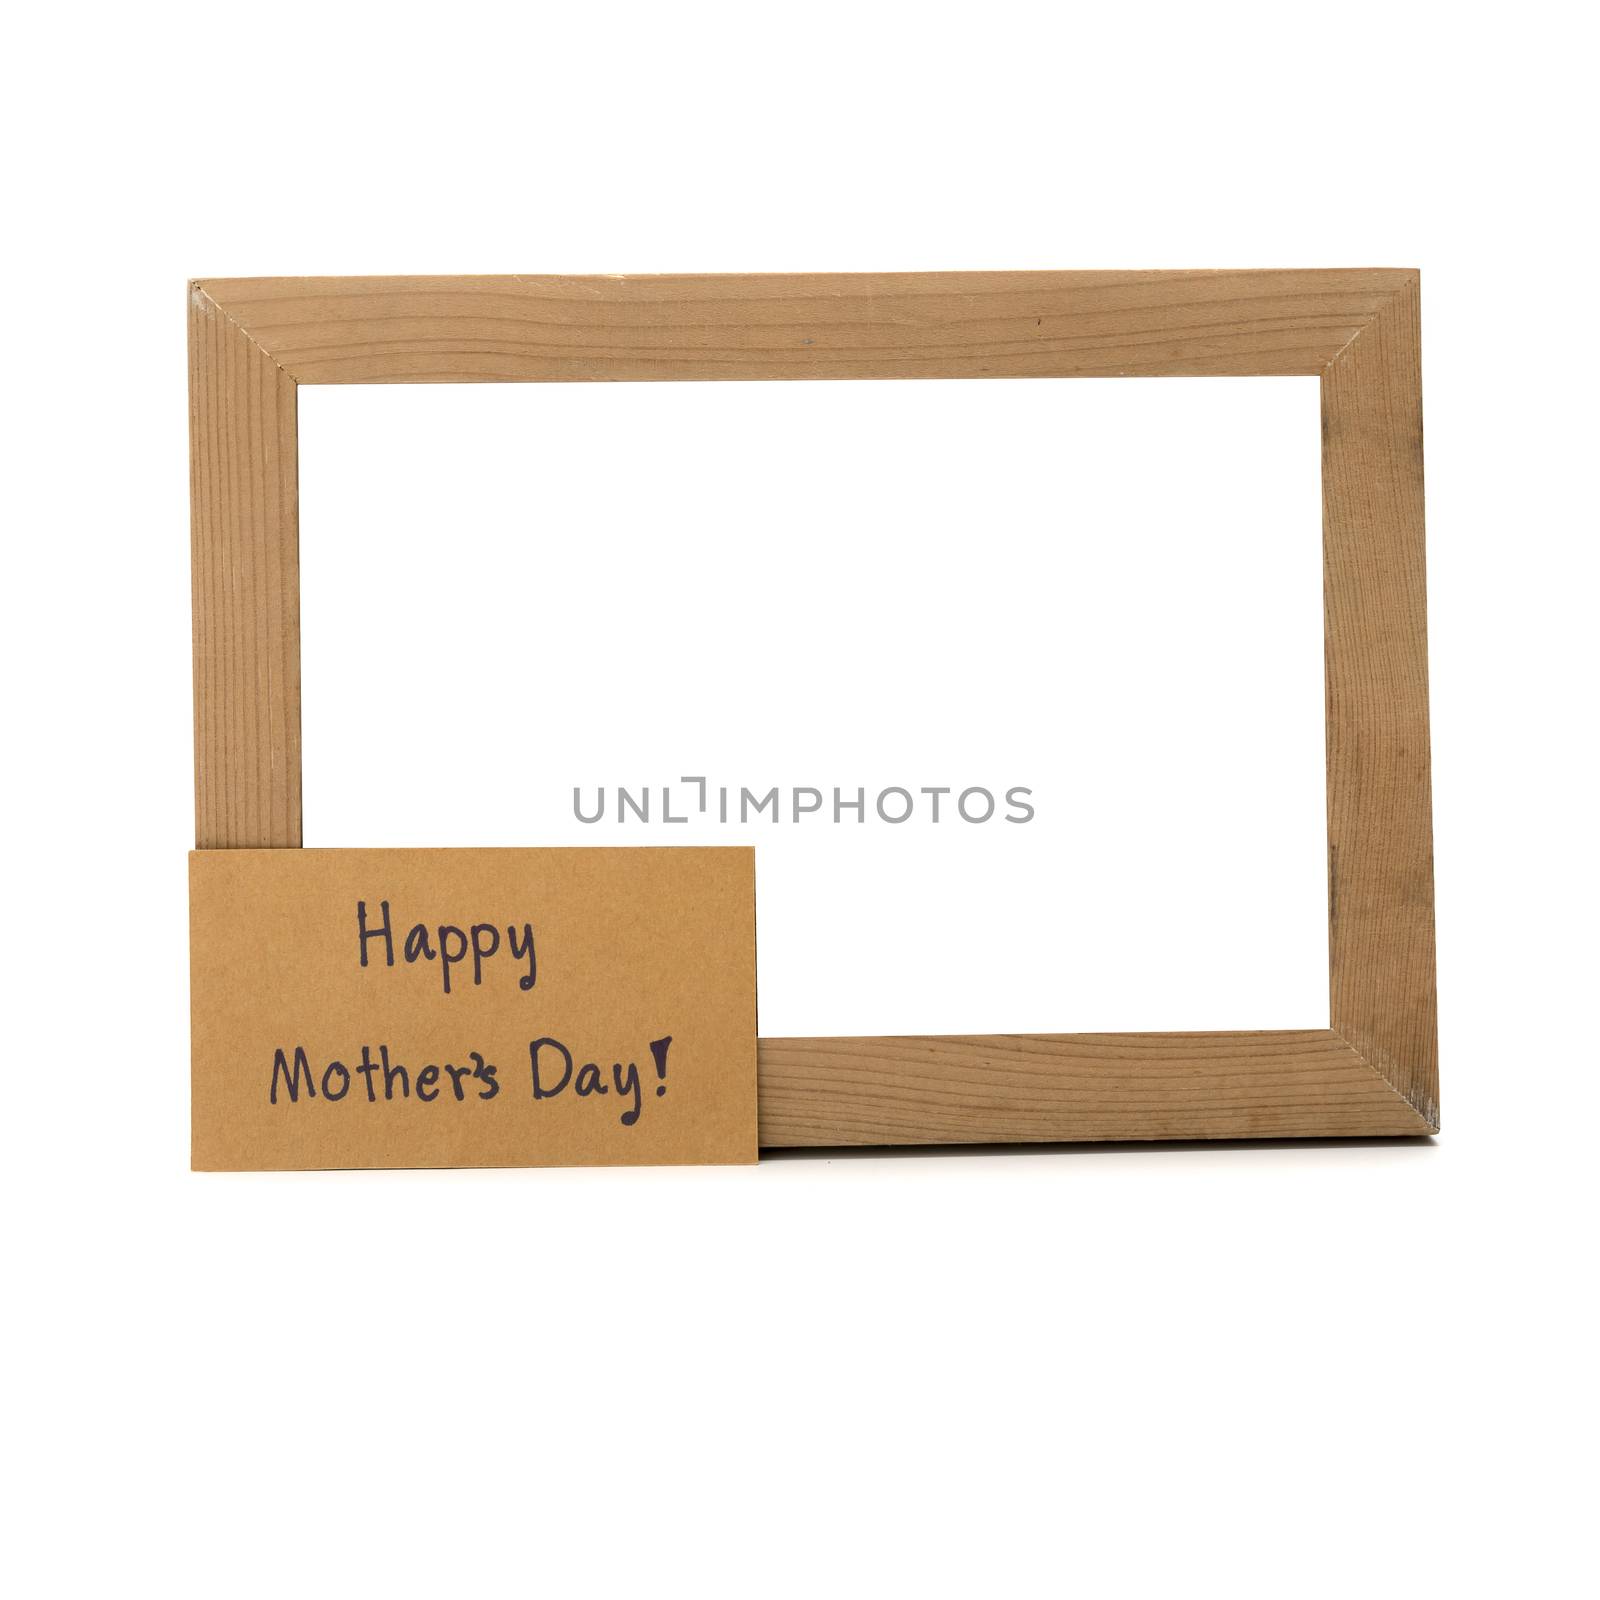 happy mother's day card and photo frame isolated on white background